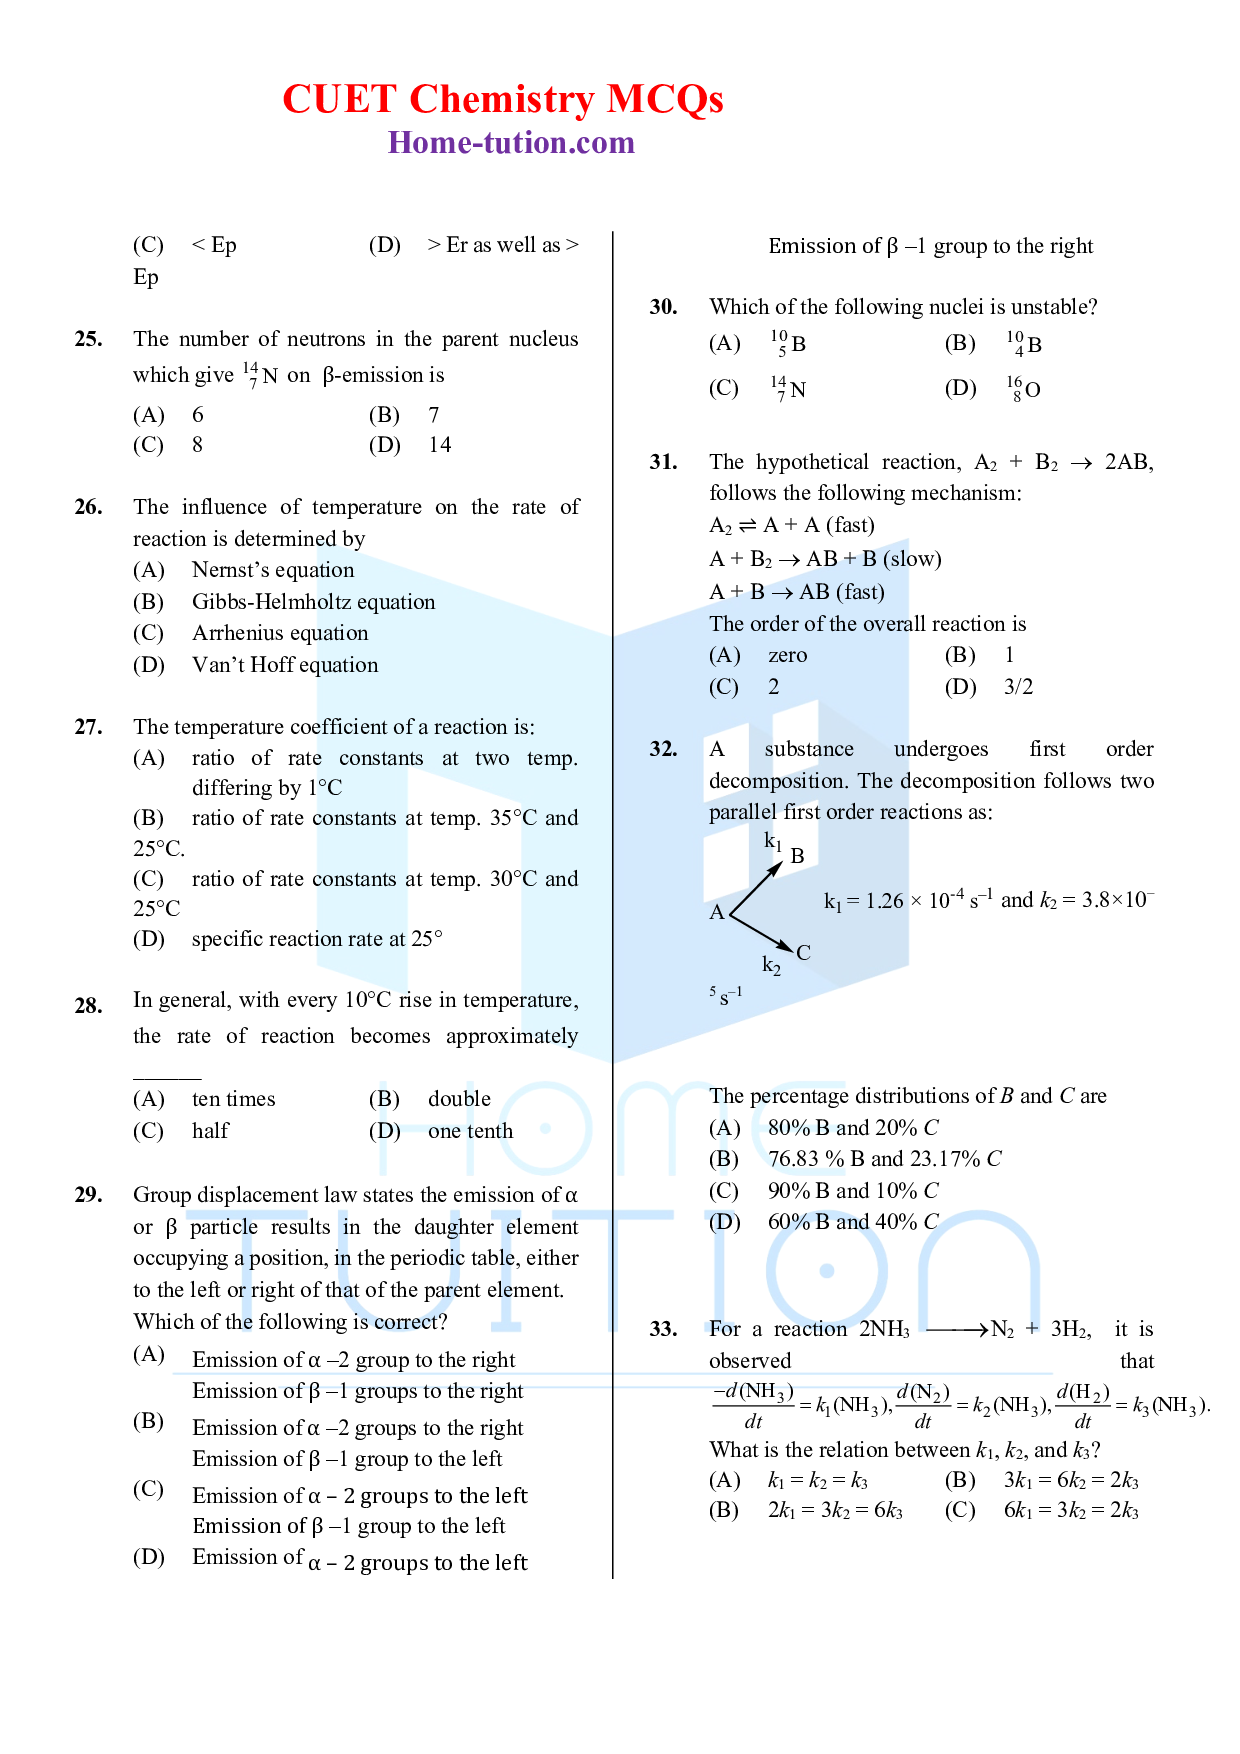 CUET MCQ Questions For Chapter-04 Chemical Kinetics